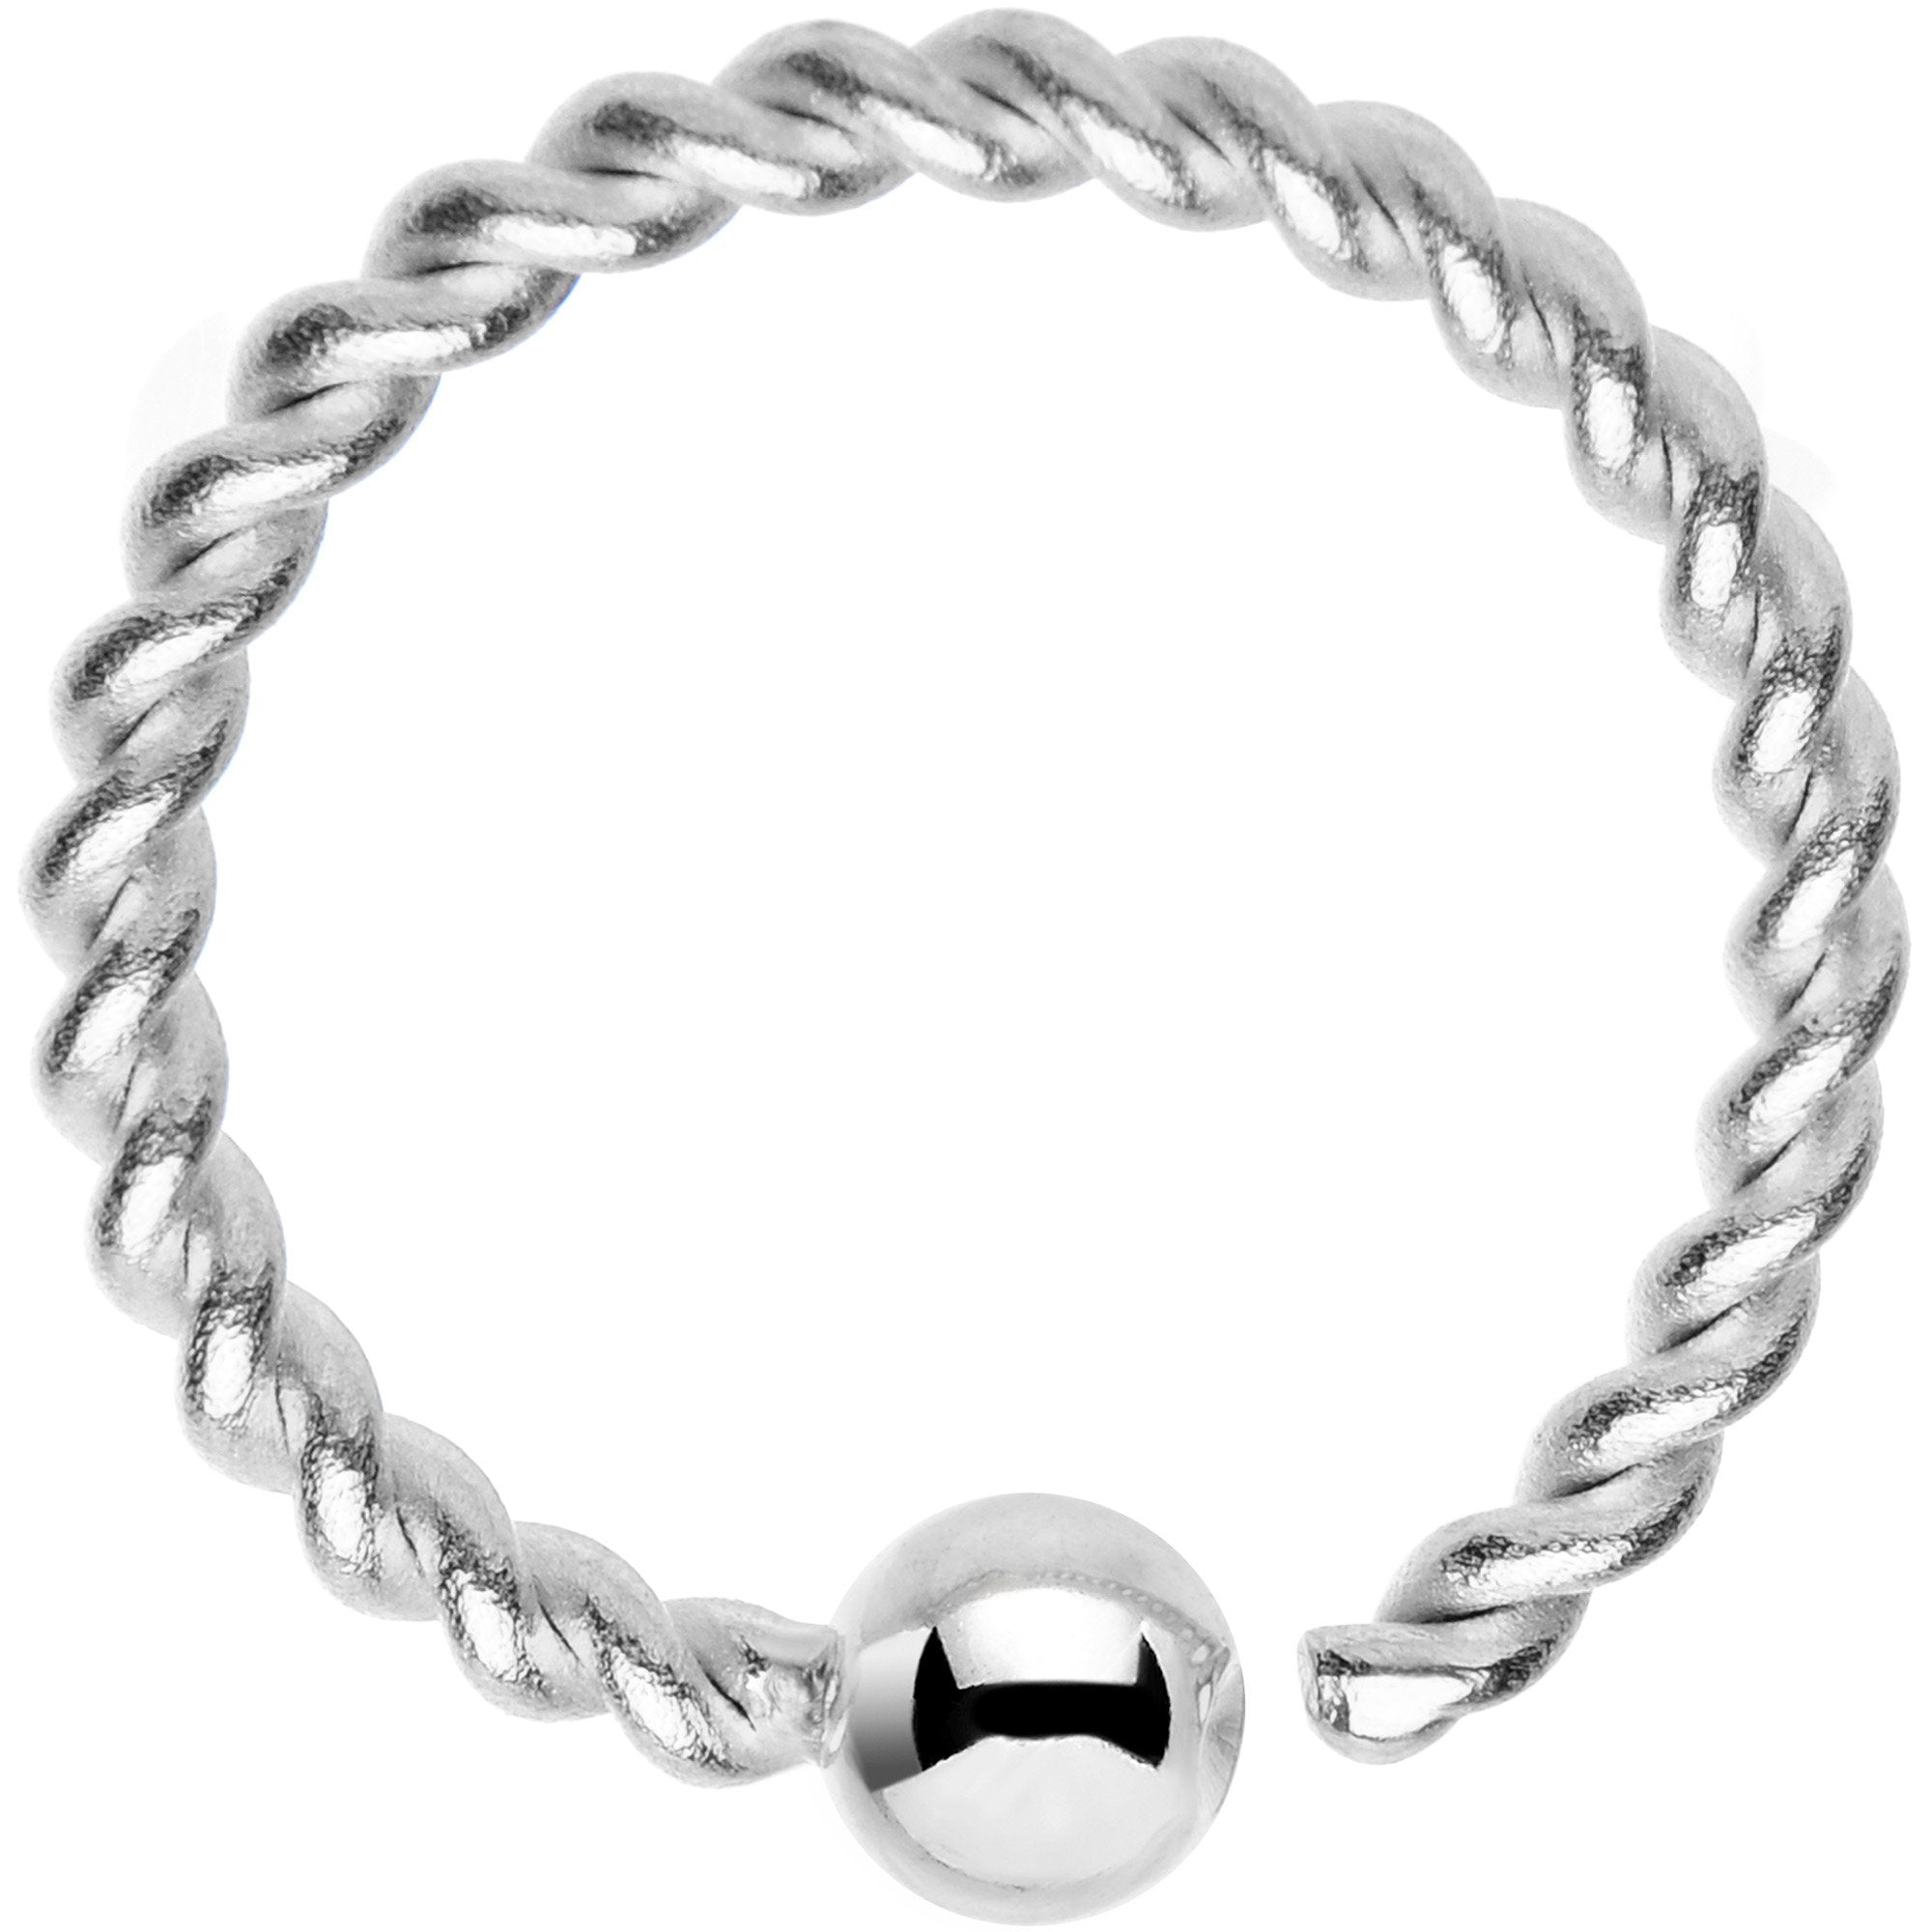 16 Gauge 3/8" So Twisted Captive Style Seamless Ring